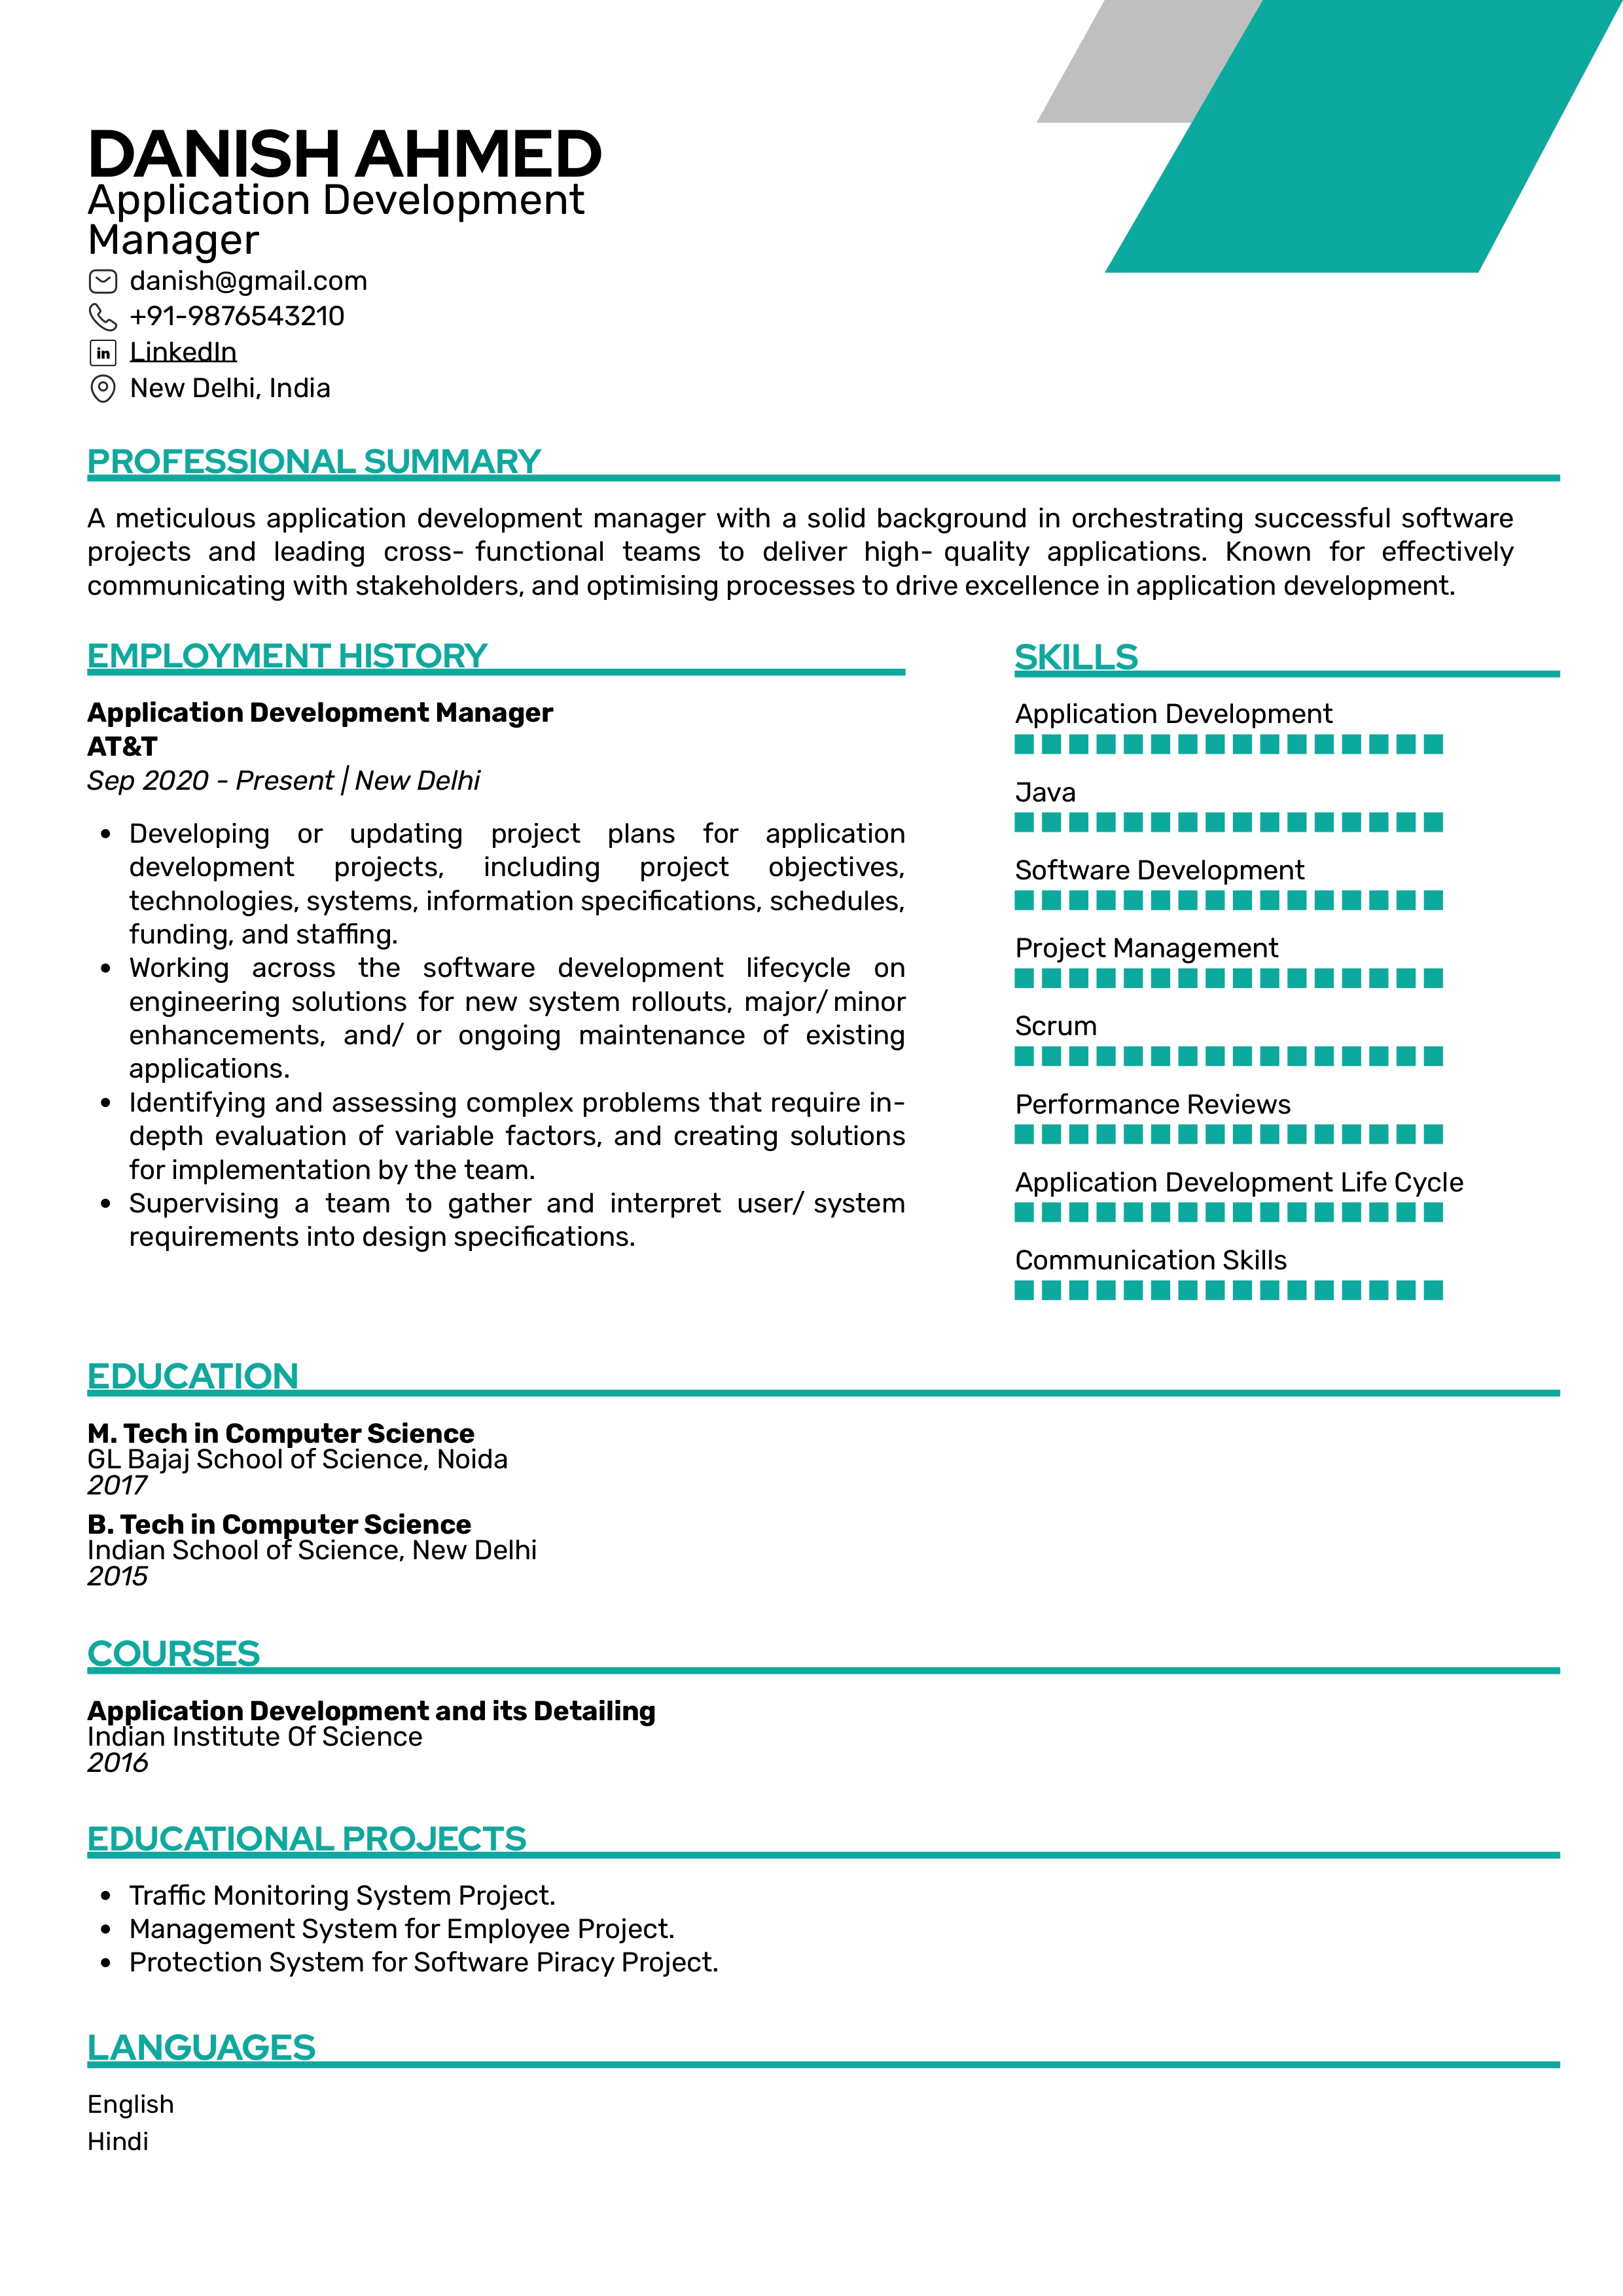 Sample Resume of Application Development Manager | Free Resume Templates & Samples on Resumod.co